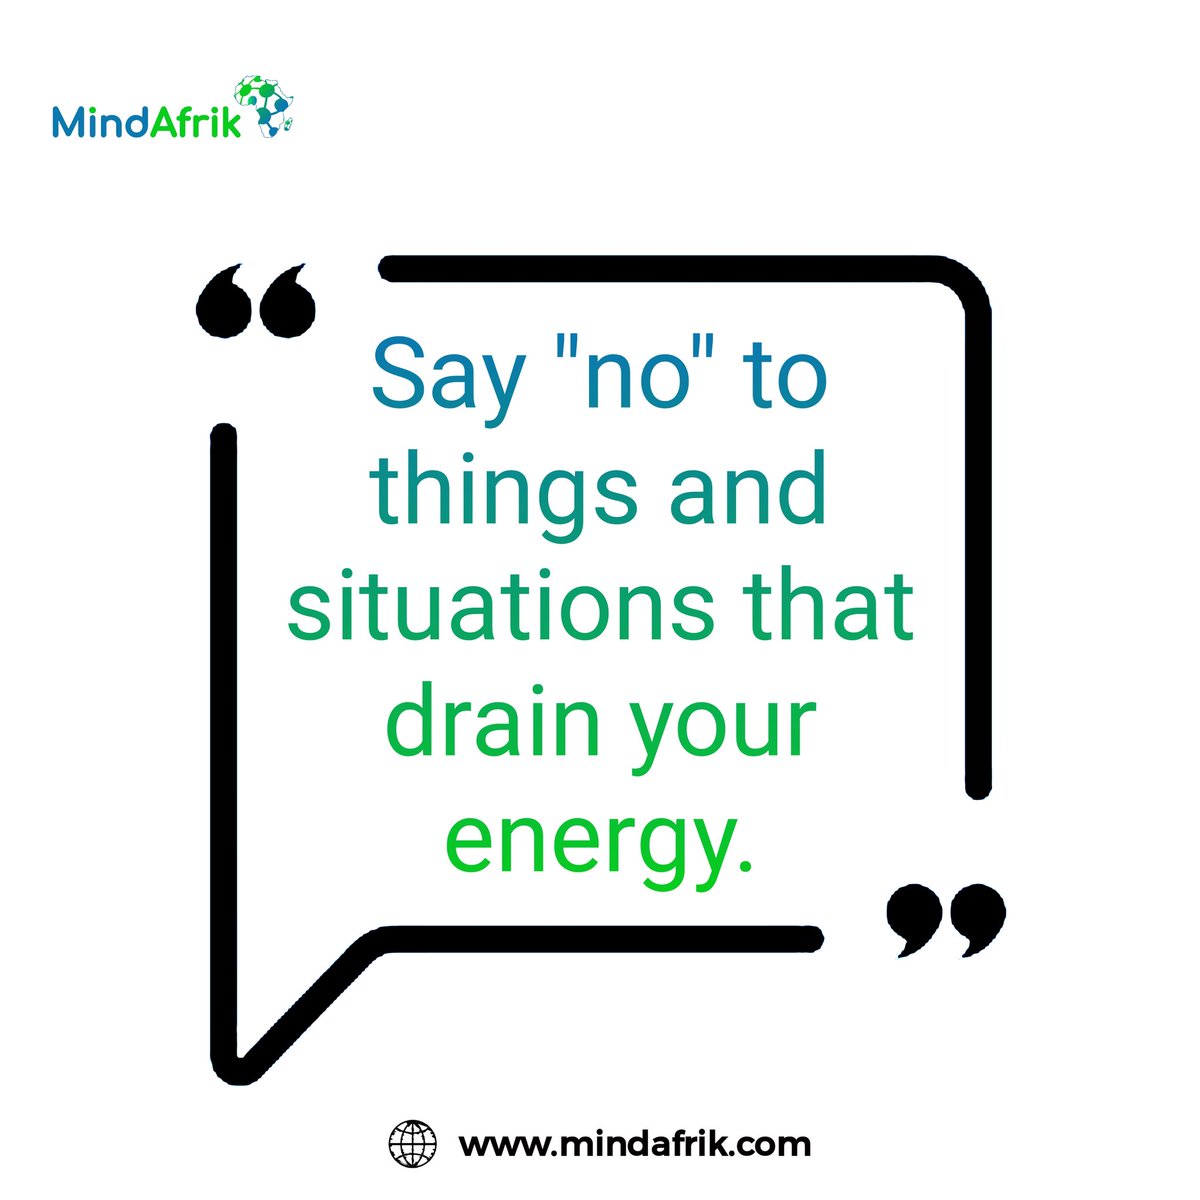 Remember that saying 'no' to things that drain your energy means saying 'yes' to yourself and your mental well-being!

#mondaymotivation #SelfCare #selflove #Gratitude #mentalhealth #mentalwellness #youmatter #mentalsupport #mentalhealthsupport #MindAfrikGISTHOUSE #mindafrik